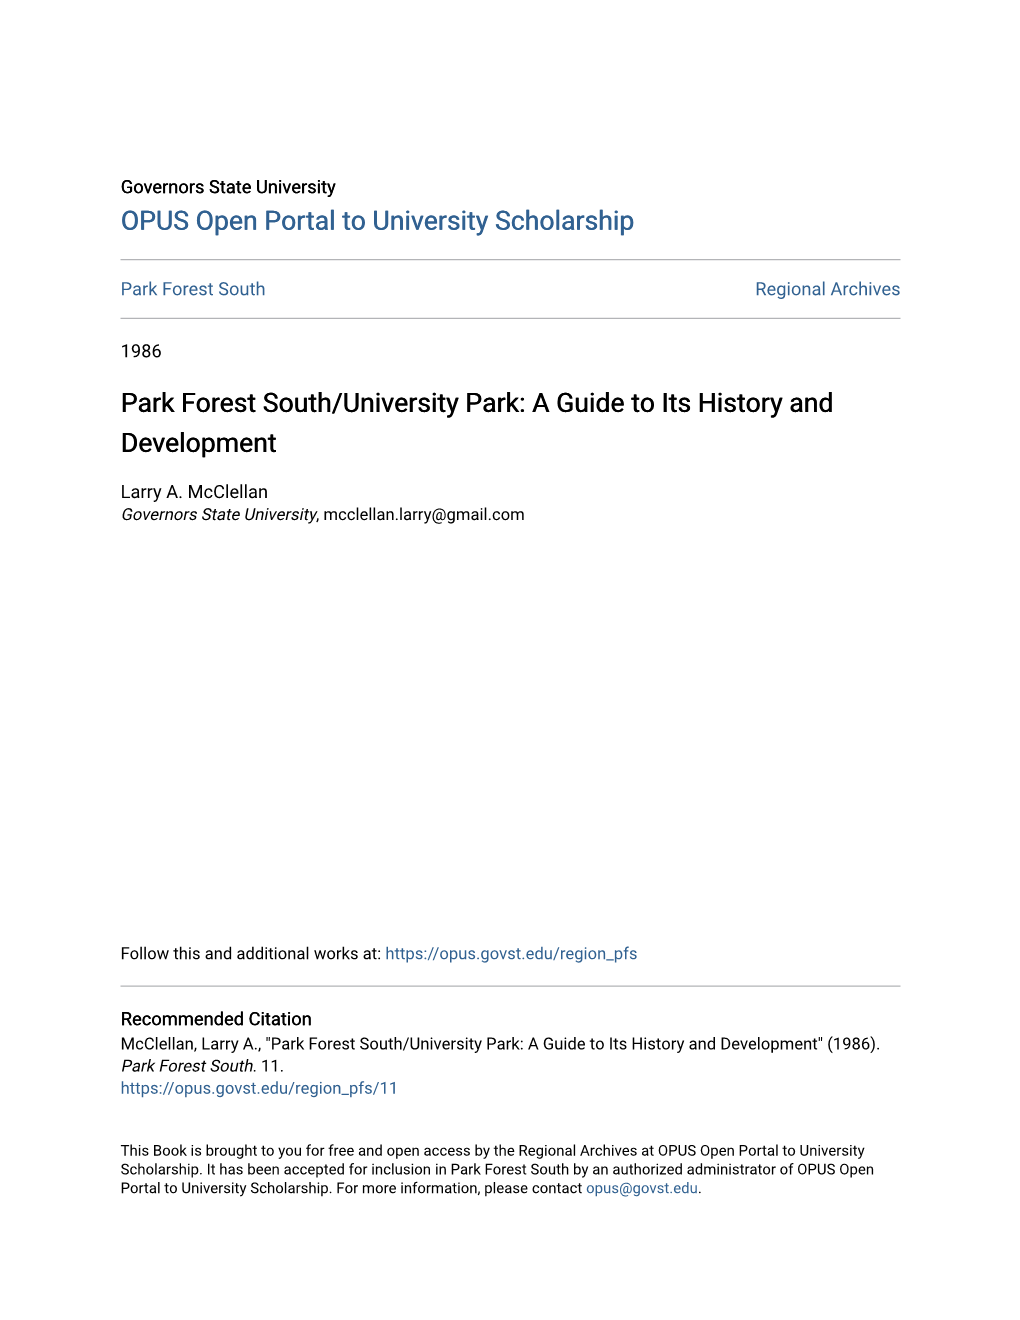 Park Forest South/University Park: a Guide to Its History and Development